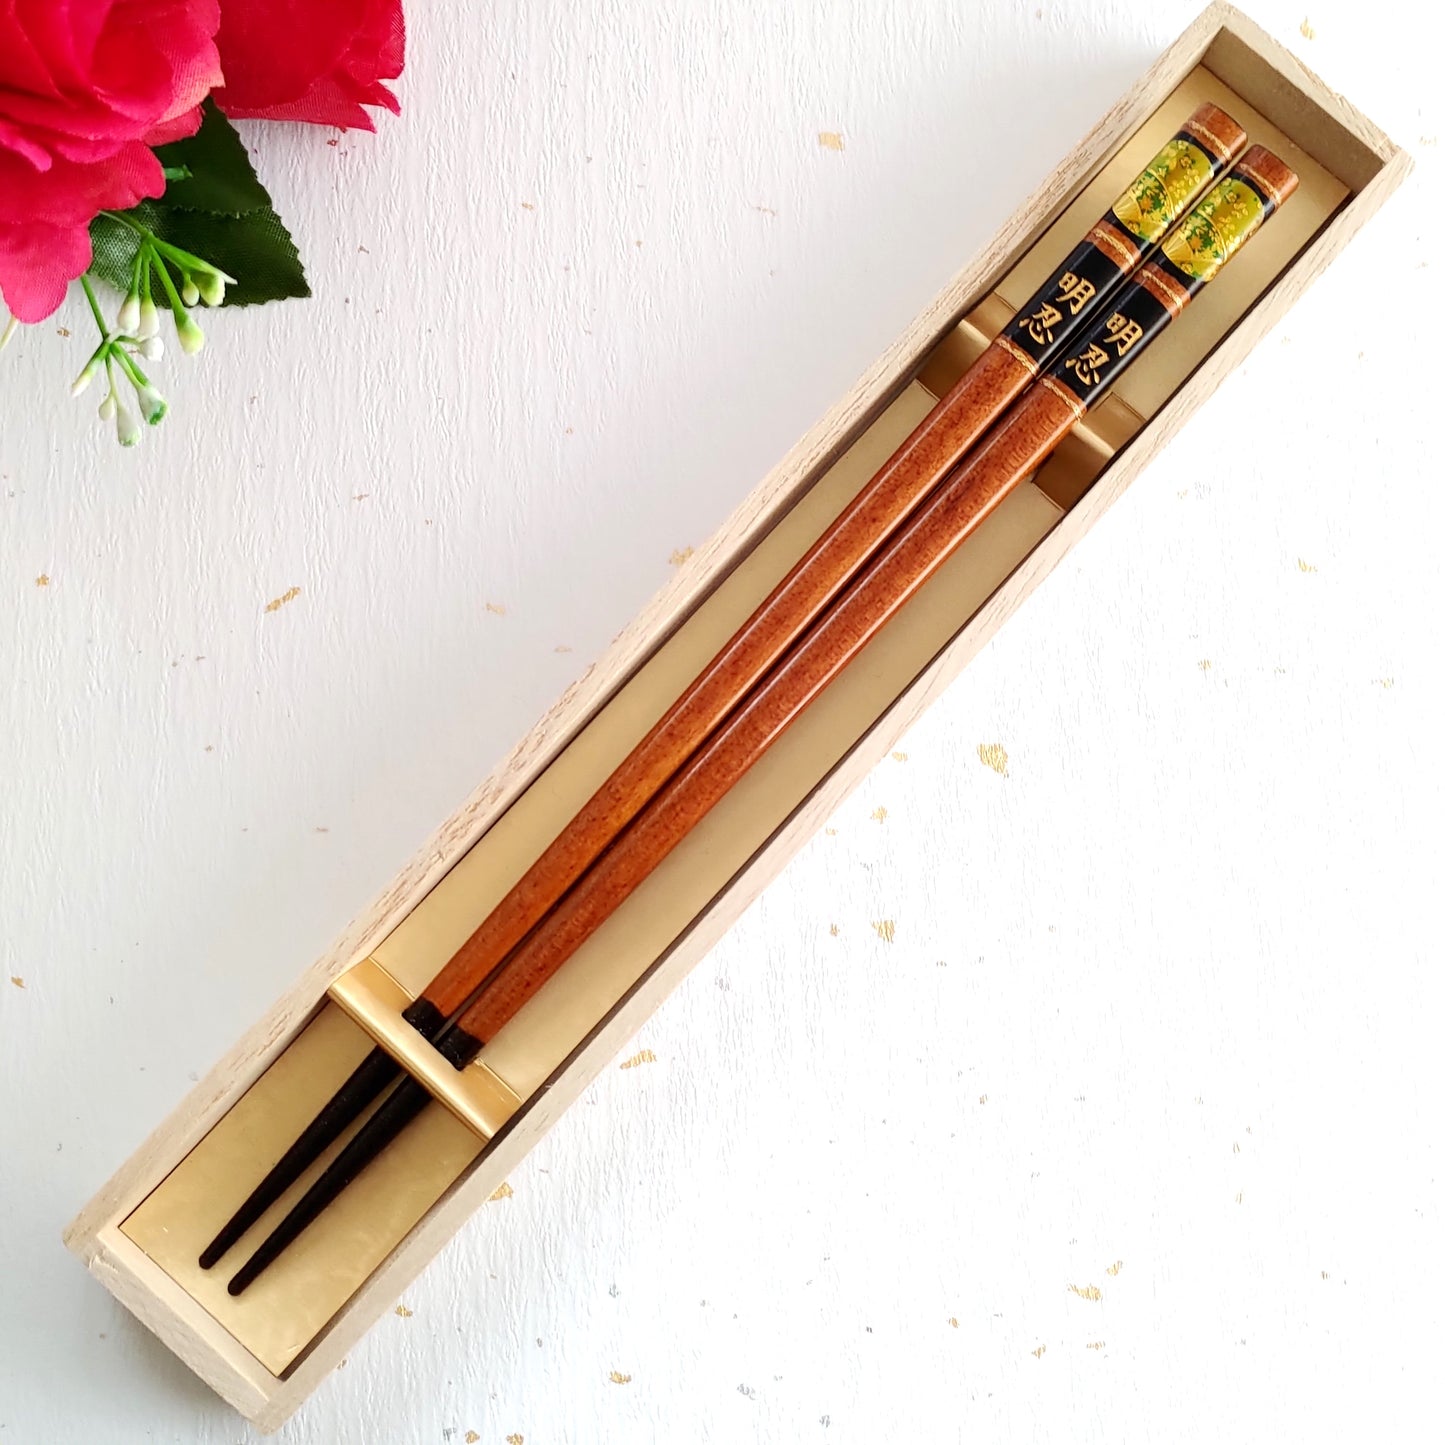 Wakasa's Japanese chopsticks crowned with gold fan and flowers  - SINGLE PAIR WITH ENGRAVED WOODEN BOX SET